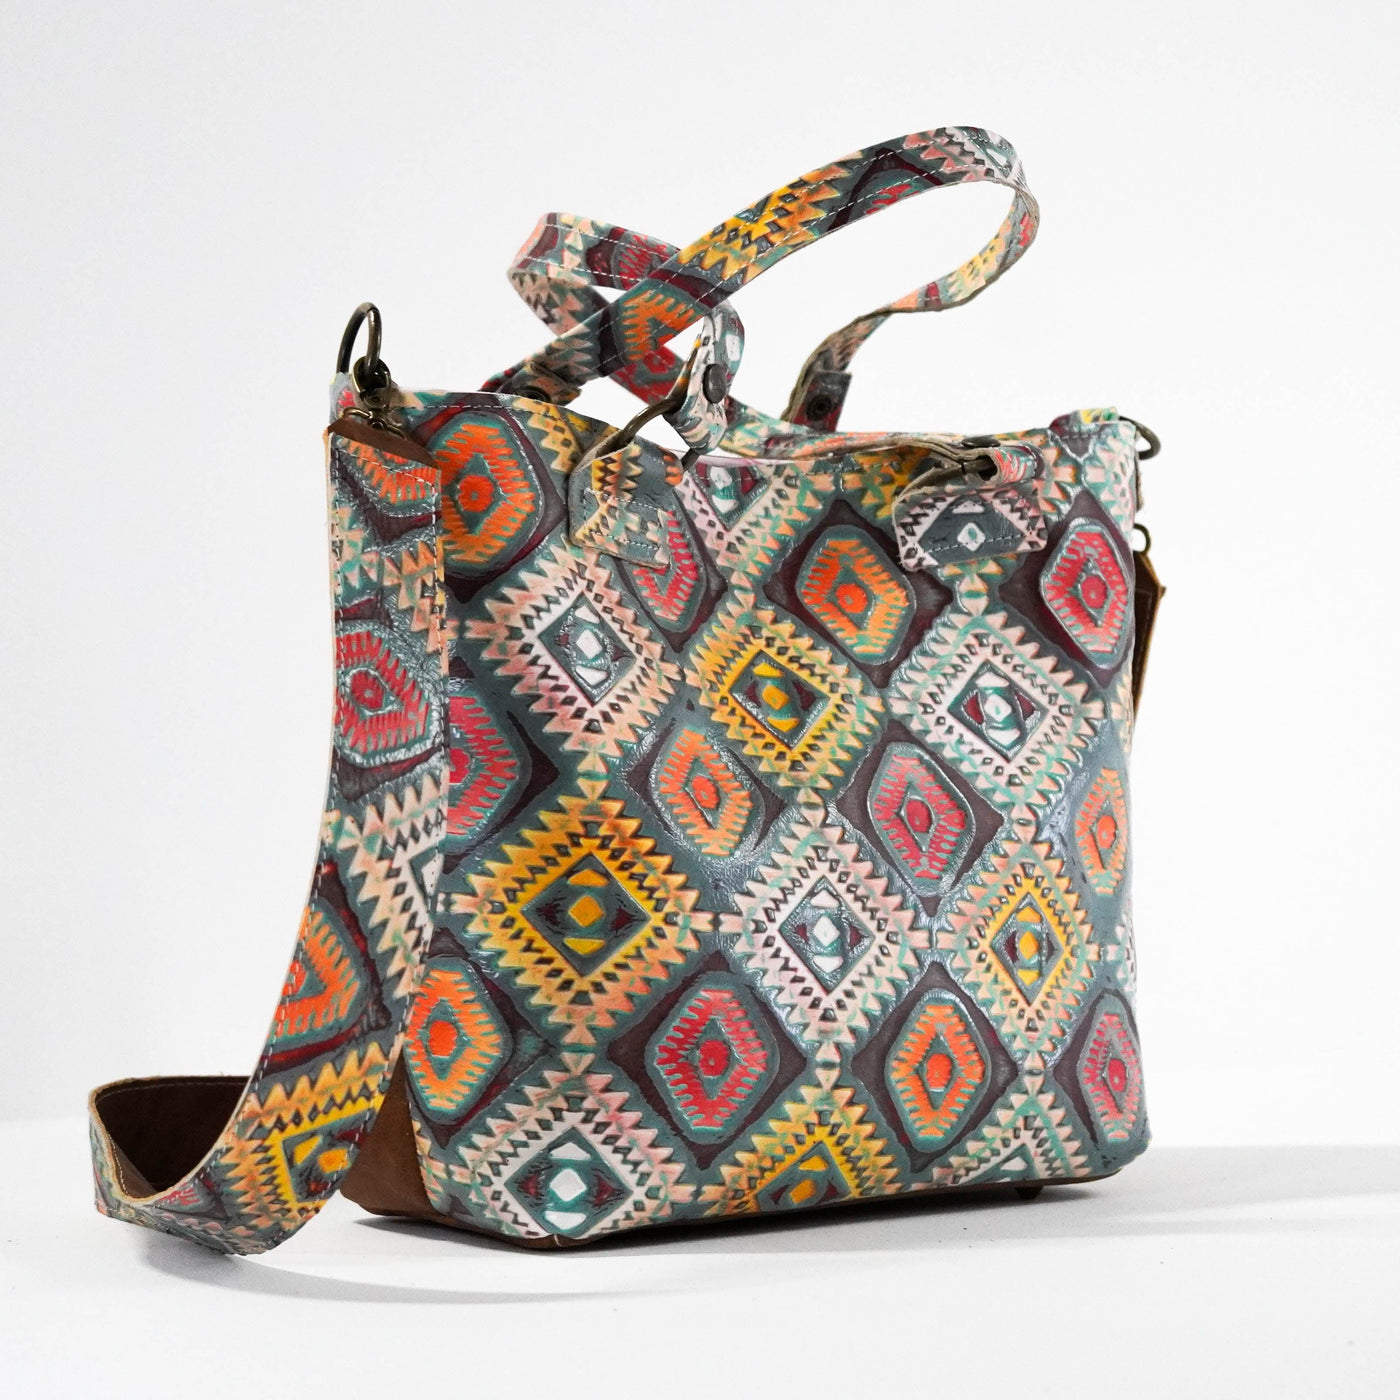 Taylor - No Hide w/ Rainbow Aztec-Taylor-Western-Cowhide-Bags-Handmade-Products-Gifts-Dancing Cactus Designs